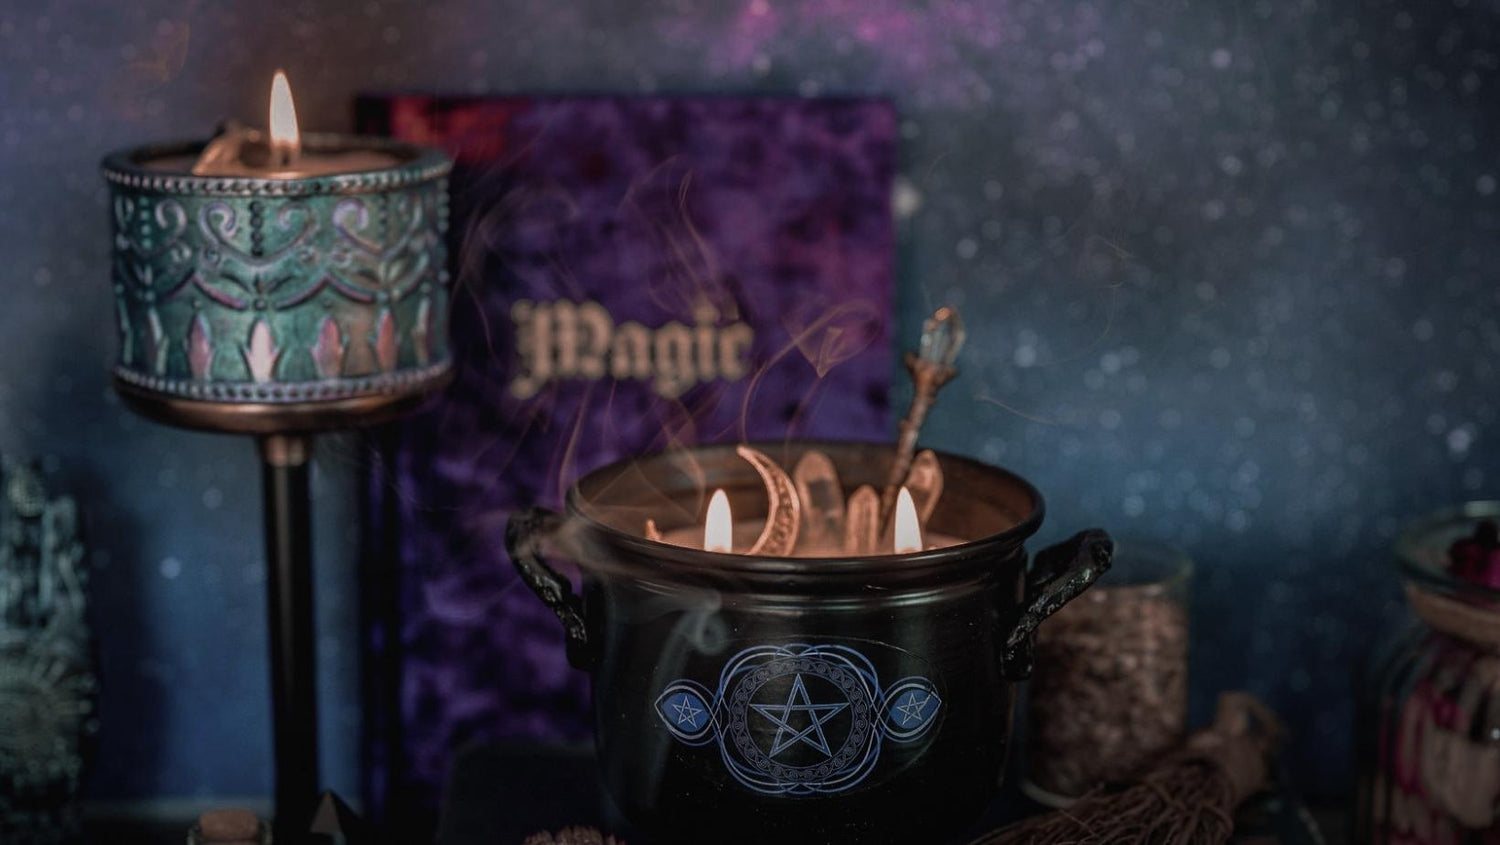 Candles for Witches from Fundamental Magick : Crystals, candles, and cauldron